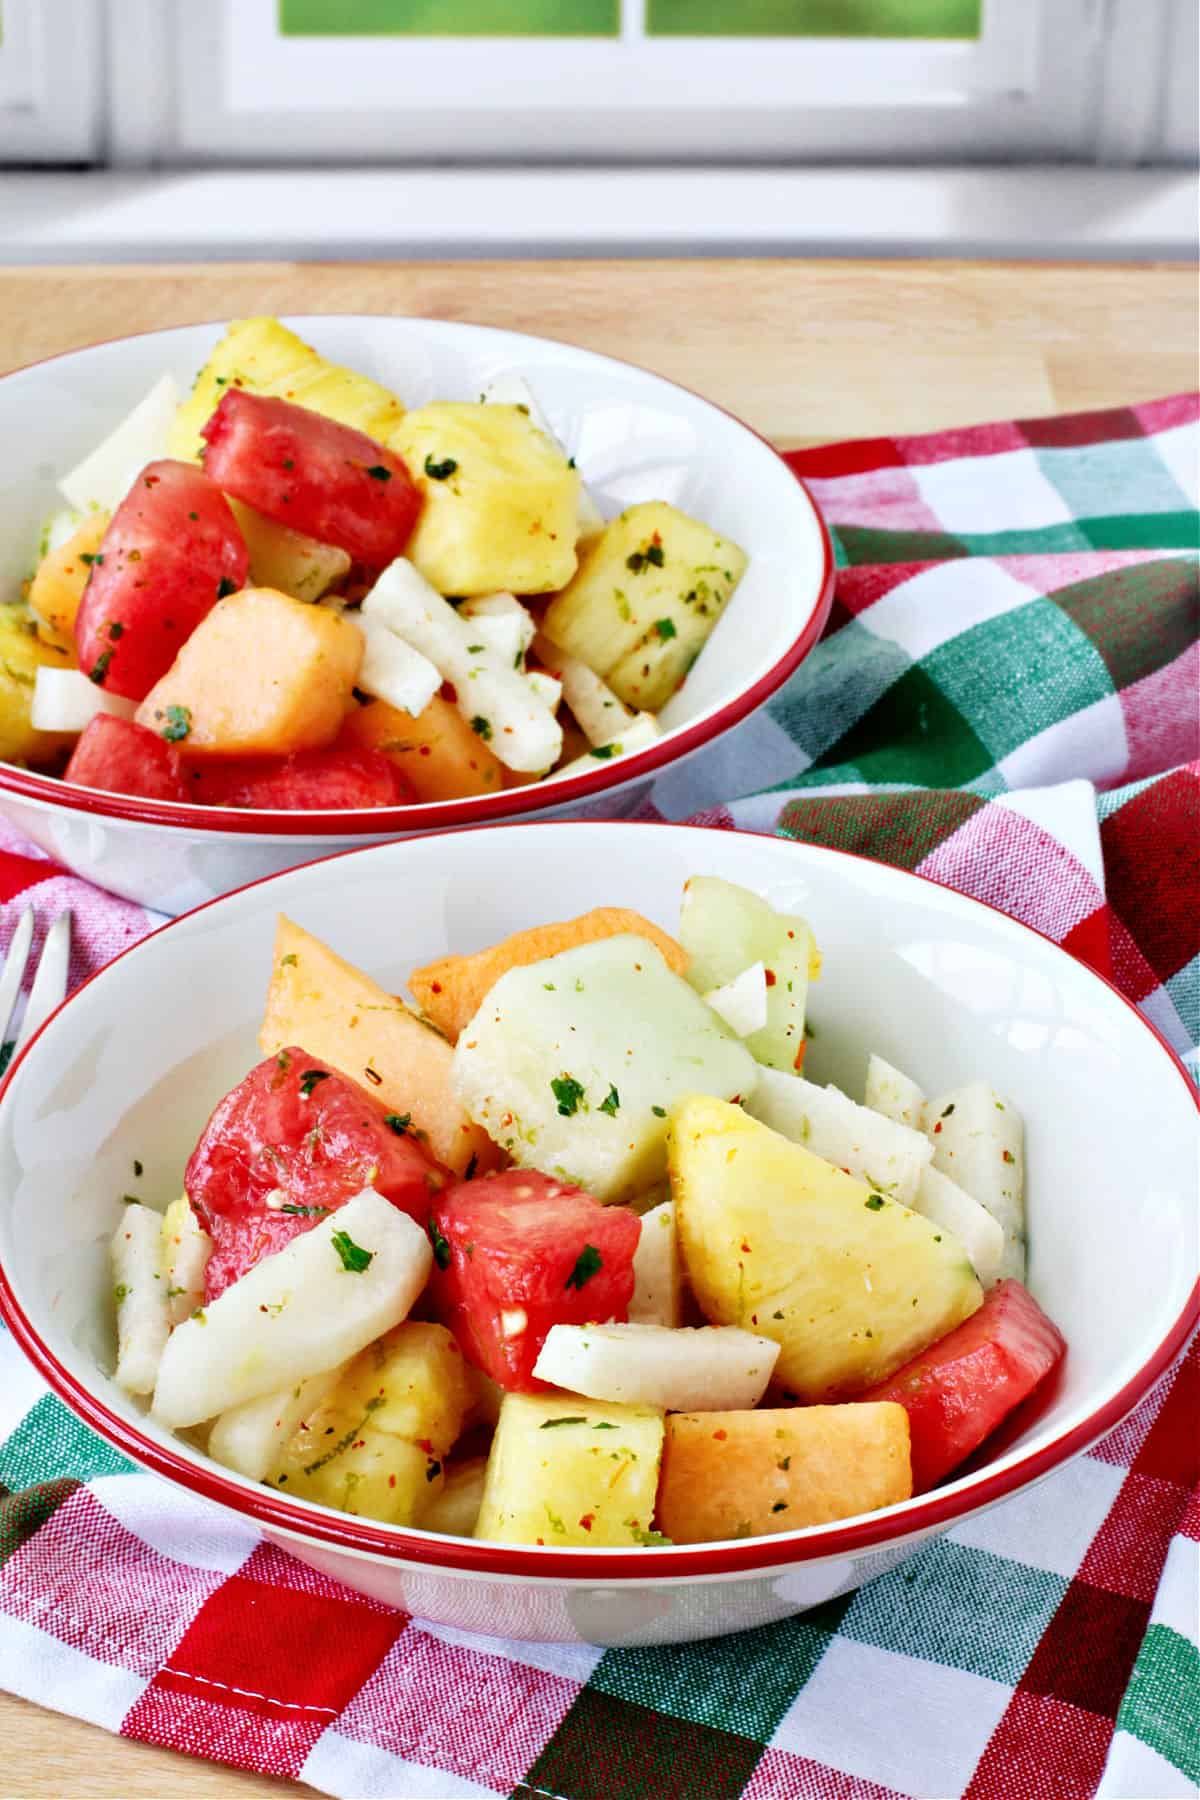 Melon, Jicama, and Pineapple Salad in red rimmed bowls.